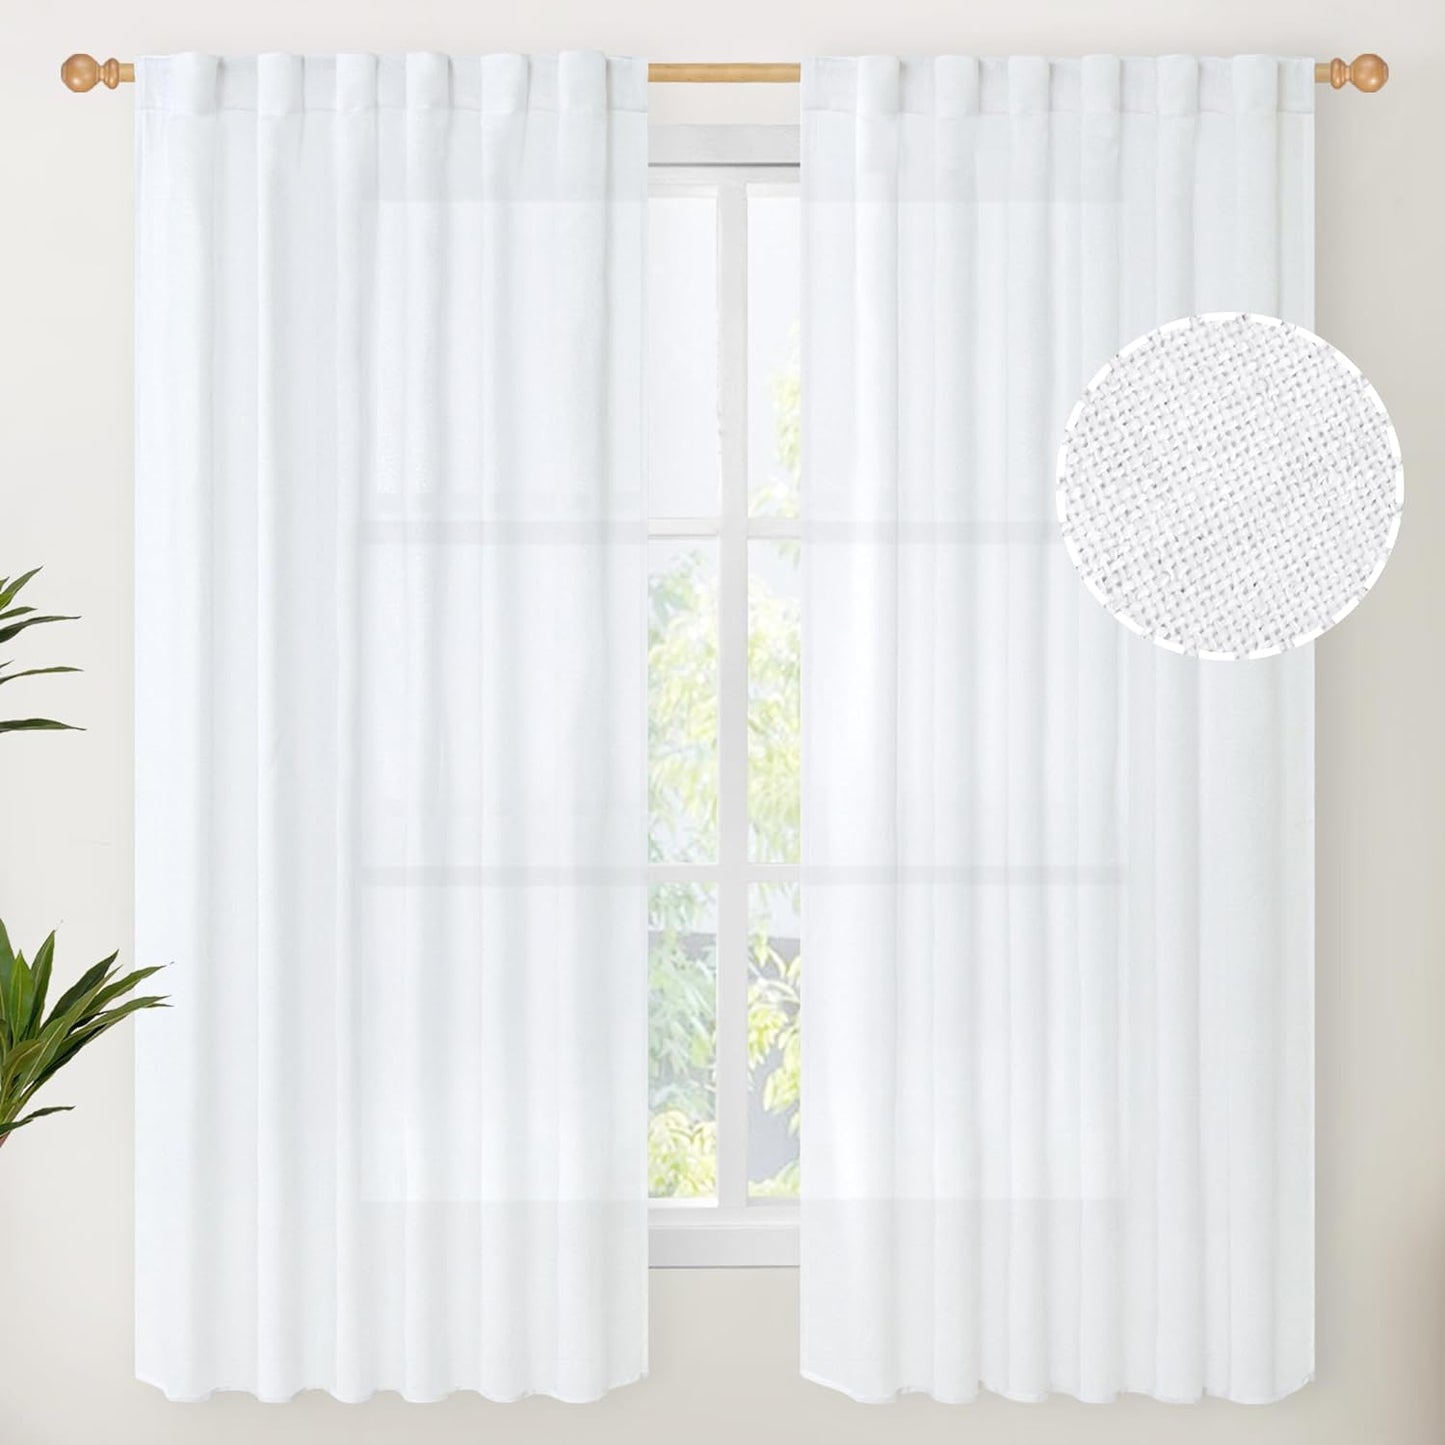 Youngstex Natural Linen Curtains 72 Inch Length 2 Panels for Living Room Light Filtering Textured Window Drapes for Bedroom Dining Office Back Tab Rod Pocket, 52 X 72 Inch  YoungsTex White 52W X 63L 